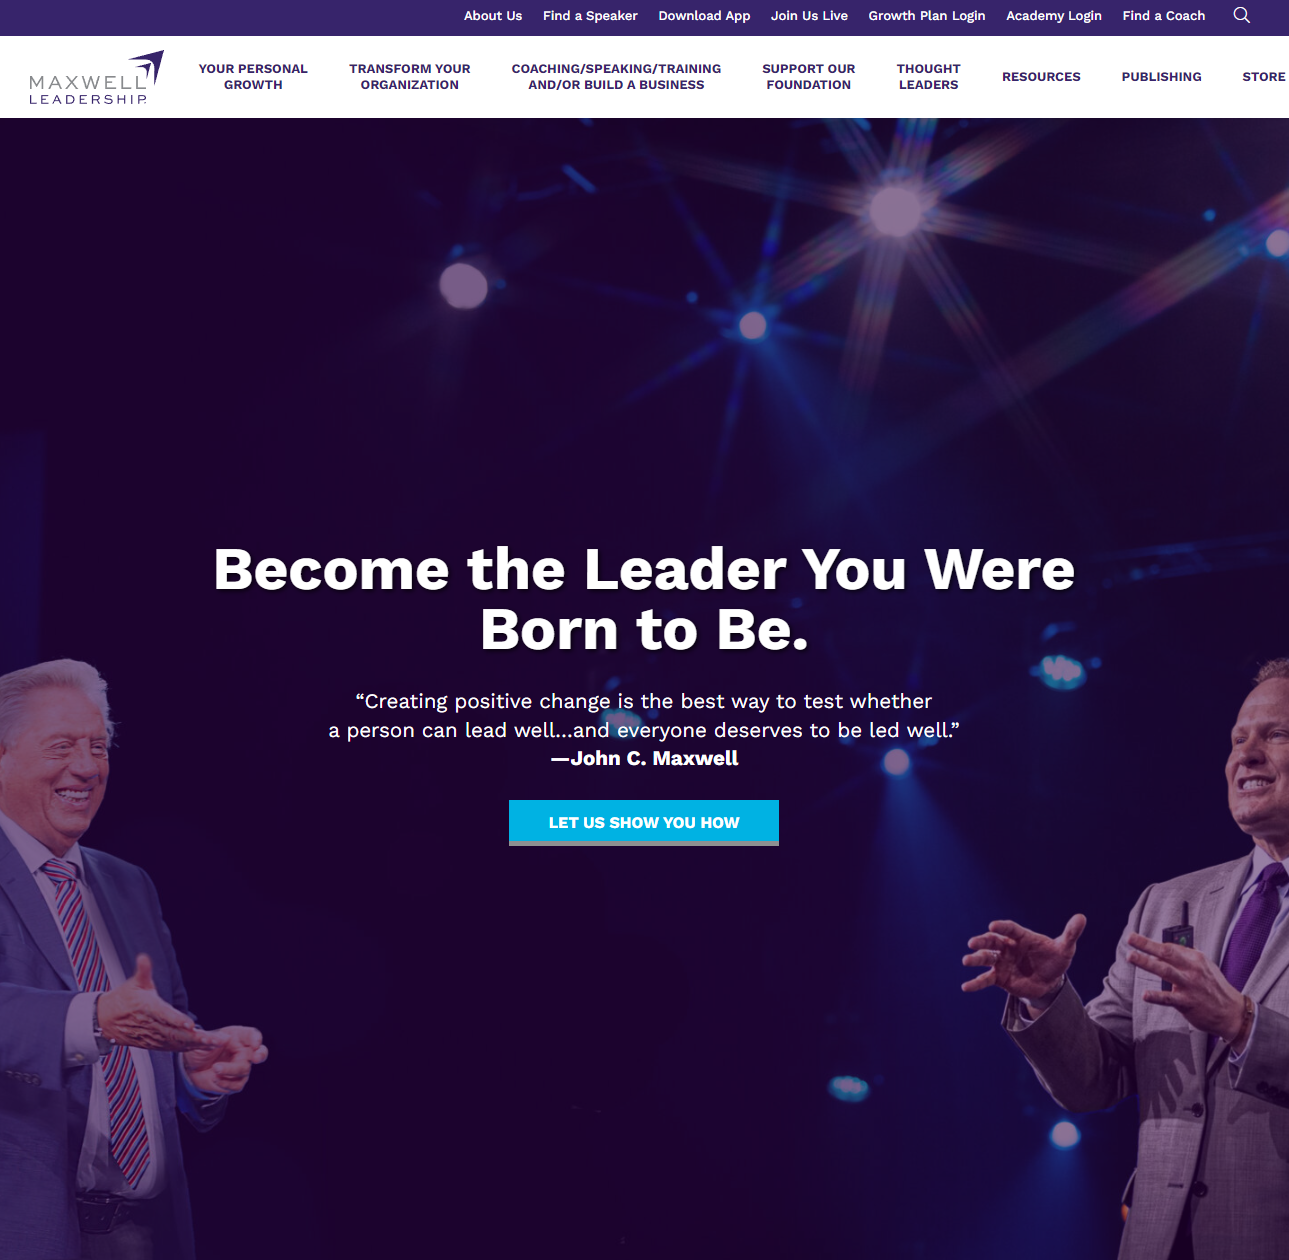 website design for business coaches, example from John MaxwellIMG Name: maxwell